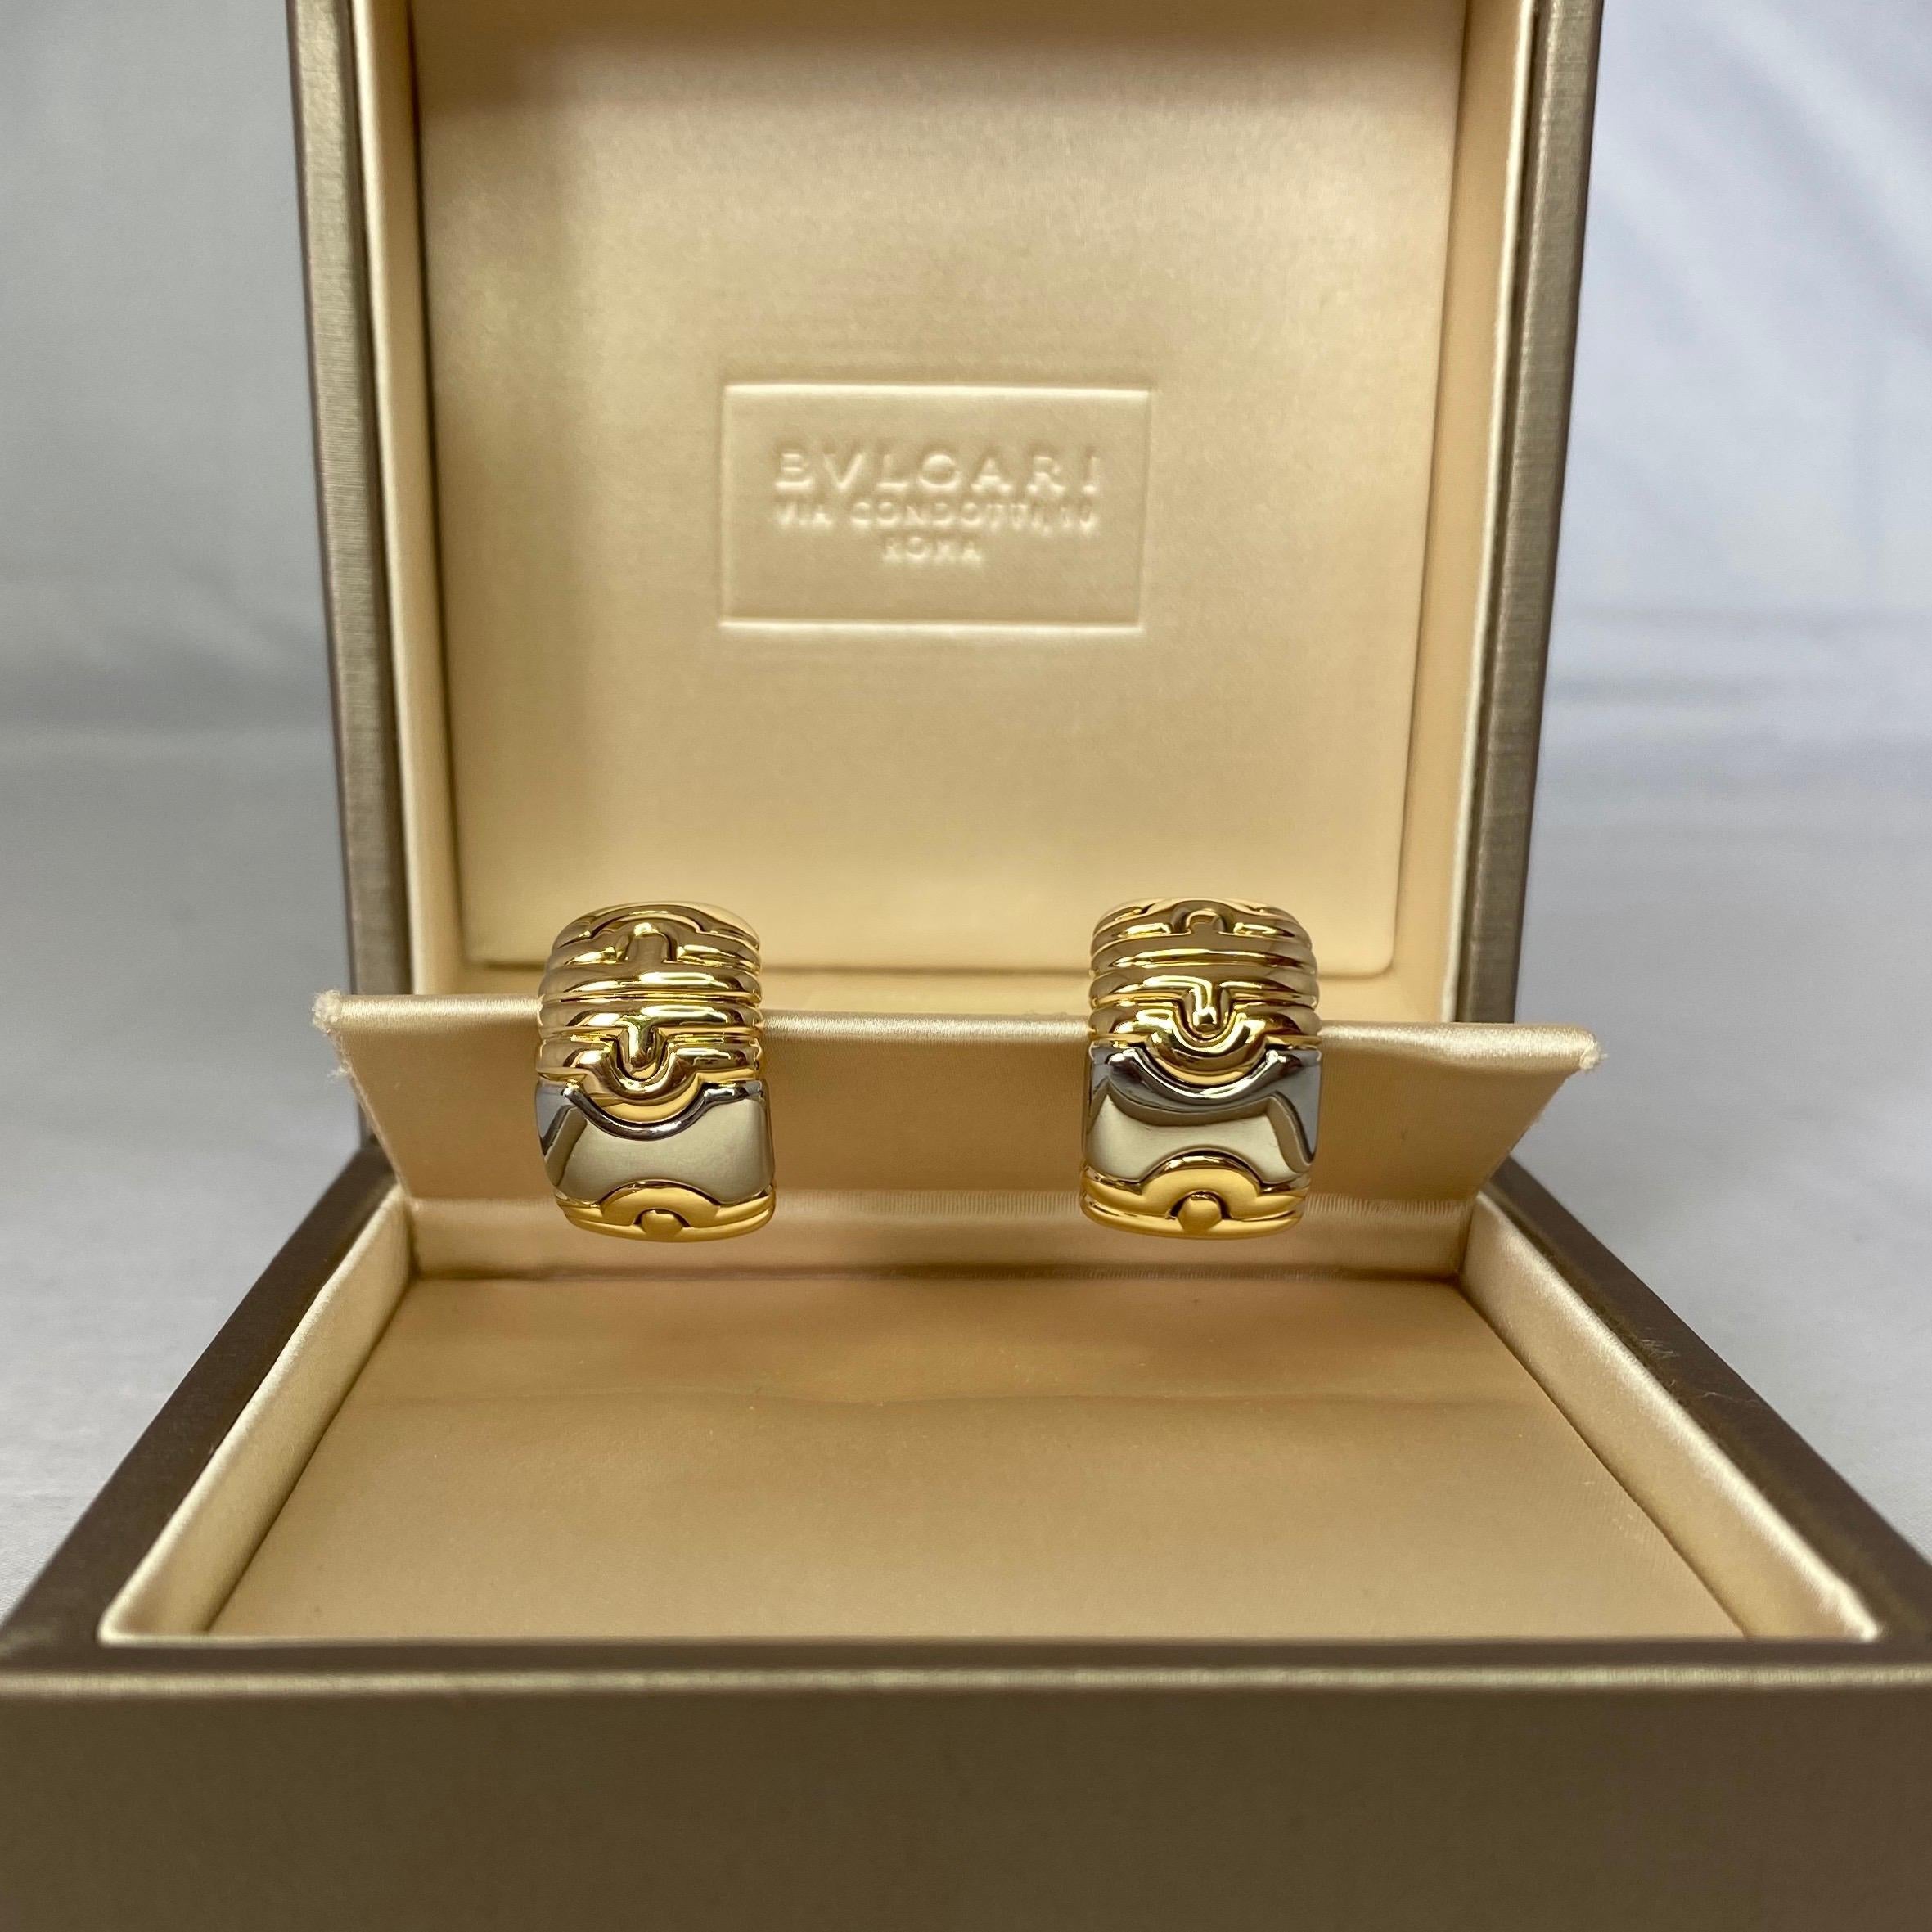 Vintage Bvlgari Parentesi 18k Yellow Gold And Stainless Steel Clip Earrings With Box.

Beautiful styled earrings, dual-toned with interlocking components. Signed ‘Bvlgari’, and 'Made In Italy' circa 1980.

These have been fully cleaned and polished